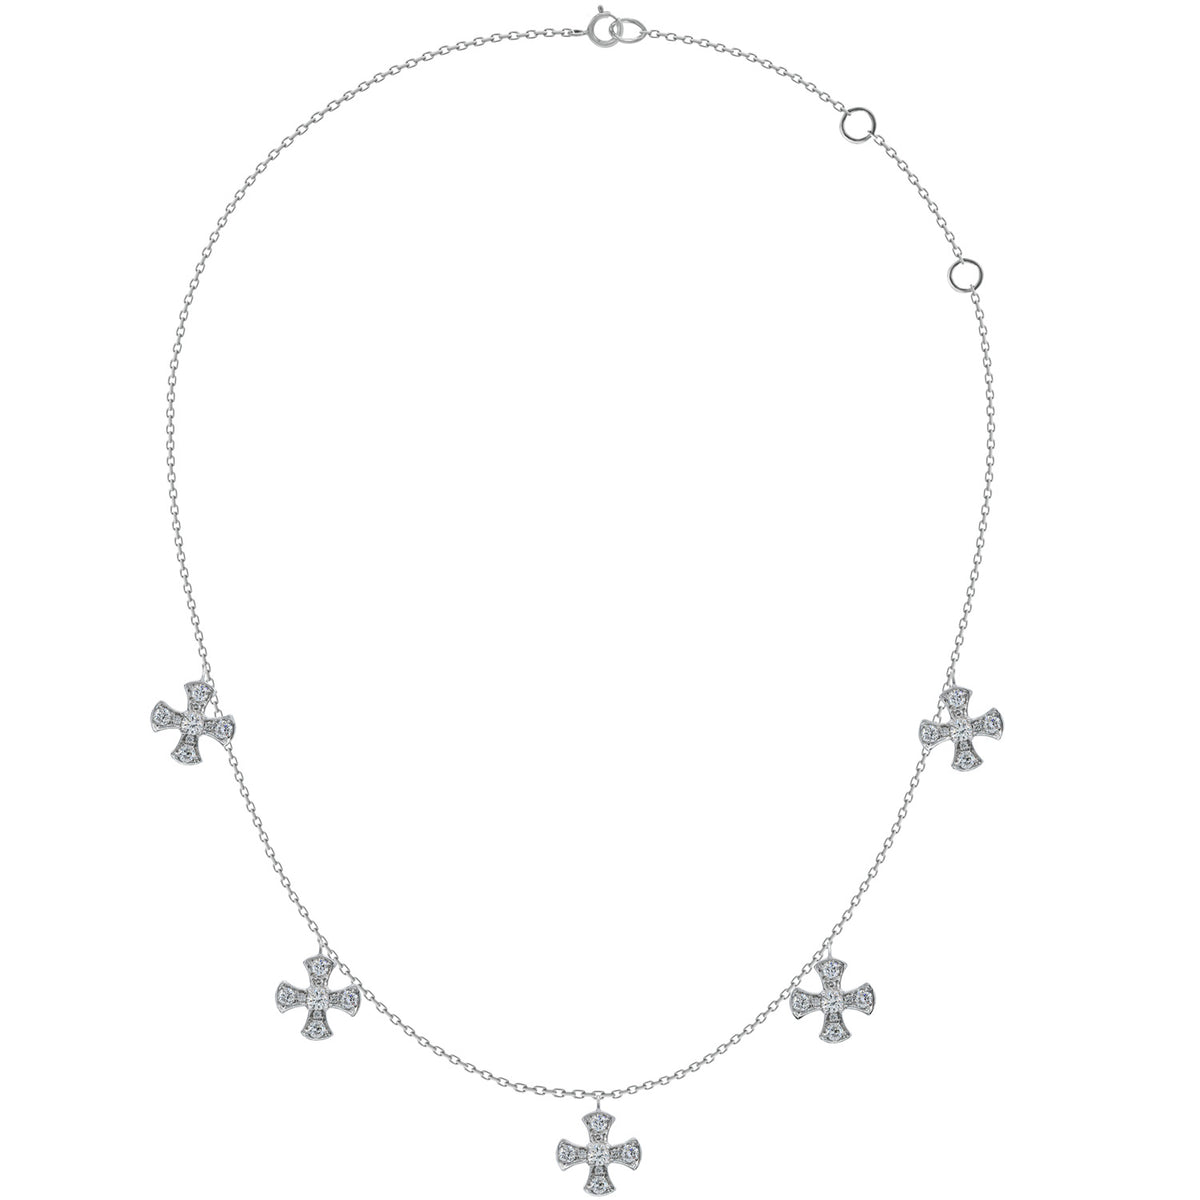 Hanging Crosses Necklace